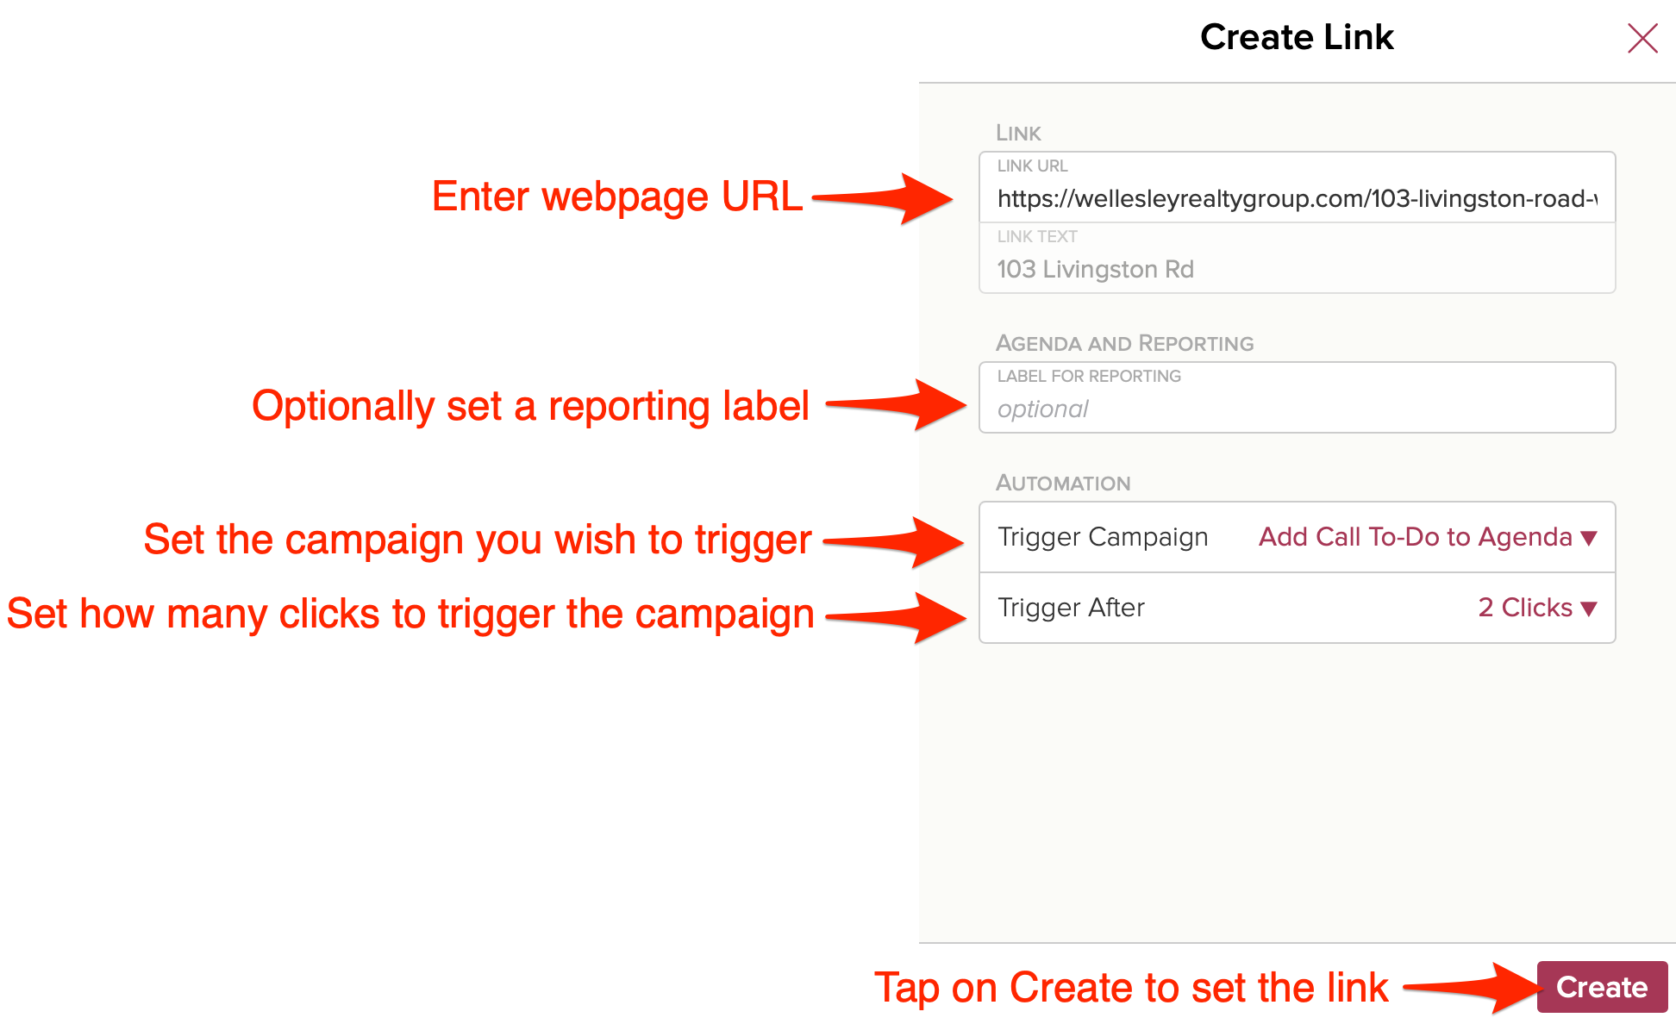 Trigger a Cloze Campaign based on link clicks. 